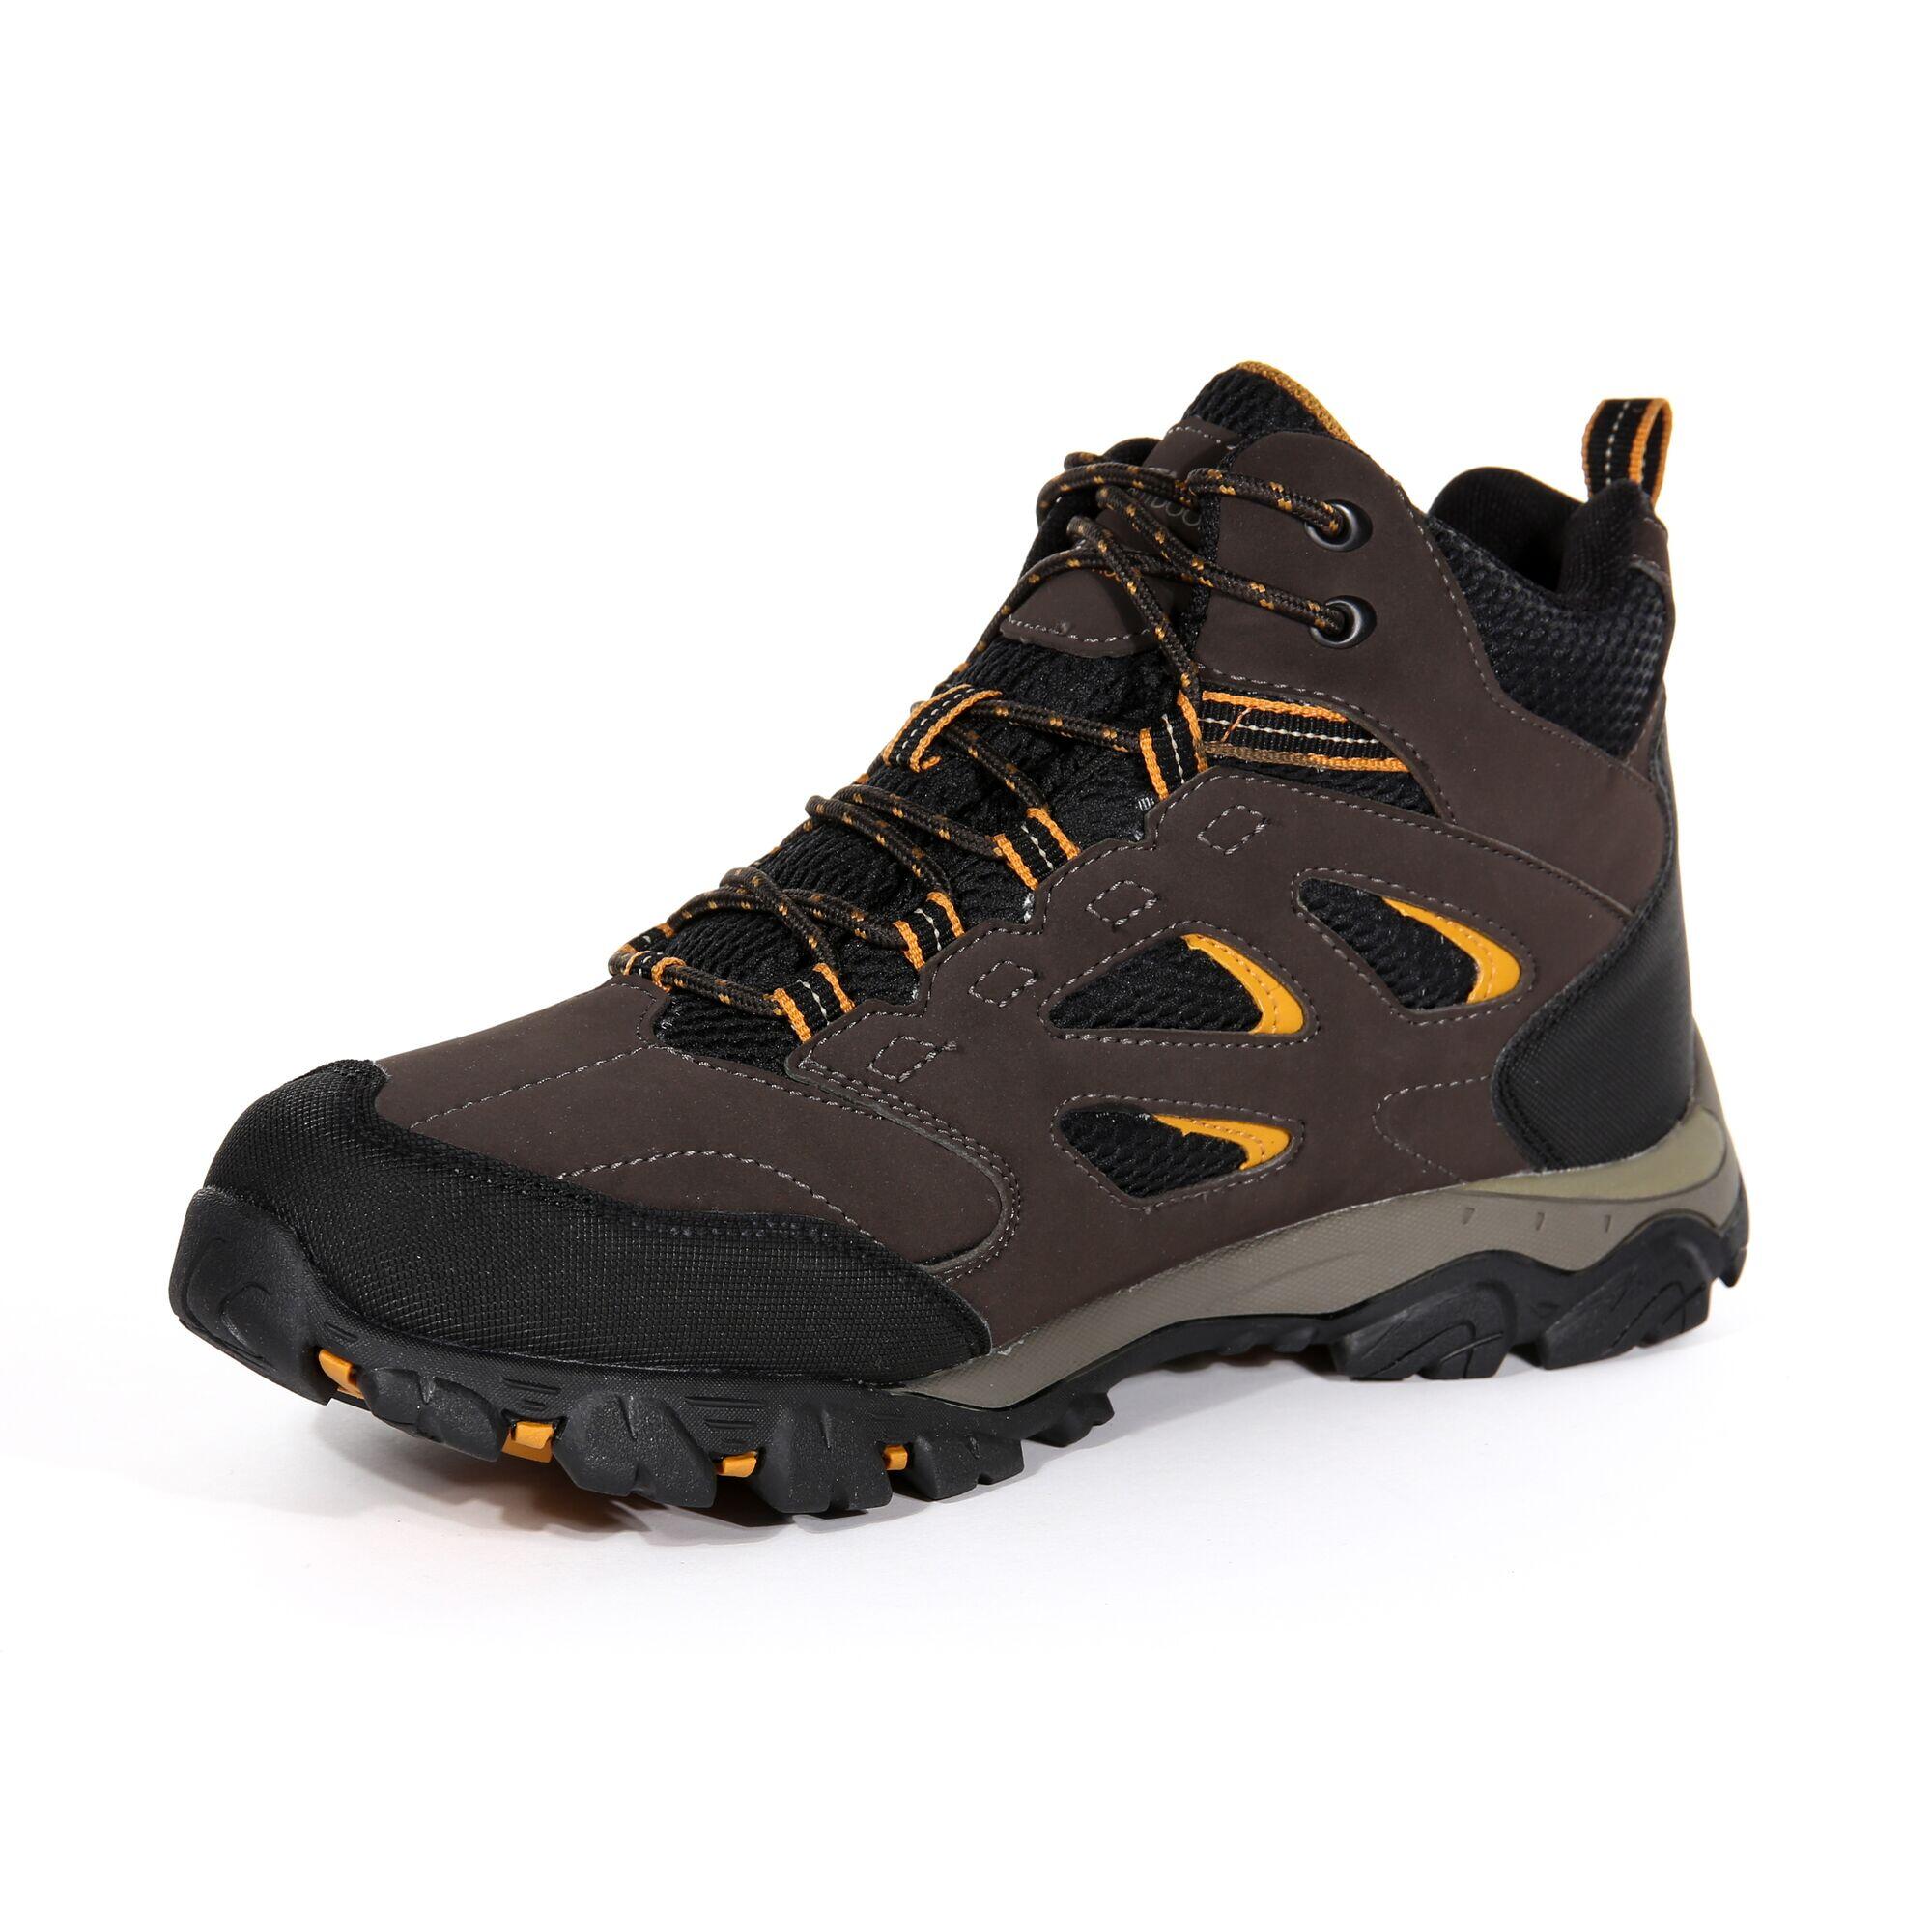 Holcombe IEP Mid Men's Hiking Boots 4/5